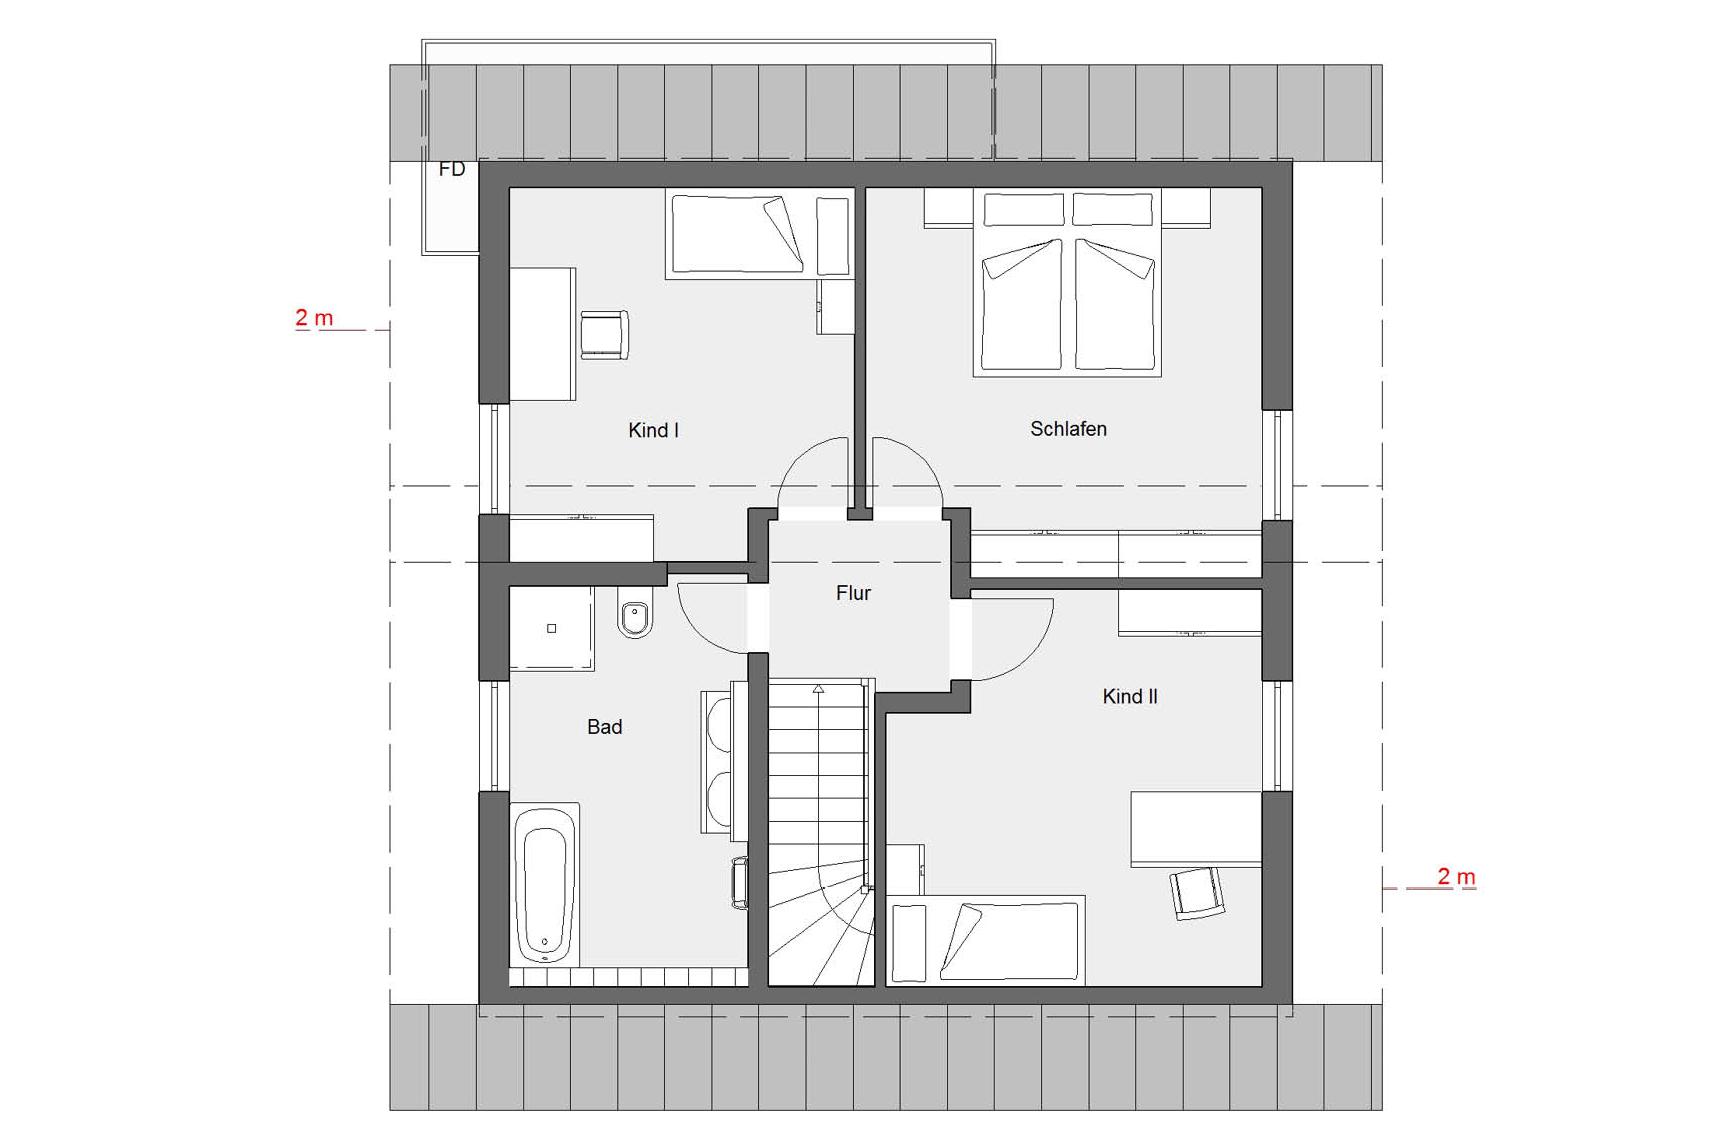 Top floor floor plan E 15-128.3 Houses with offset single-pitch roof